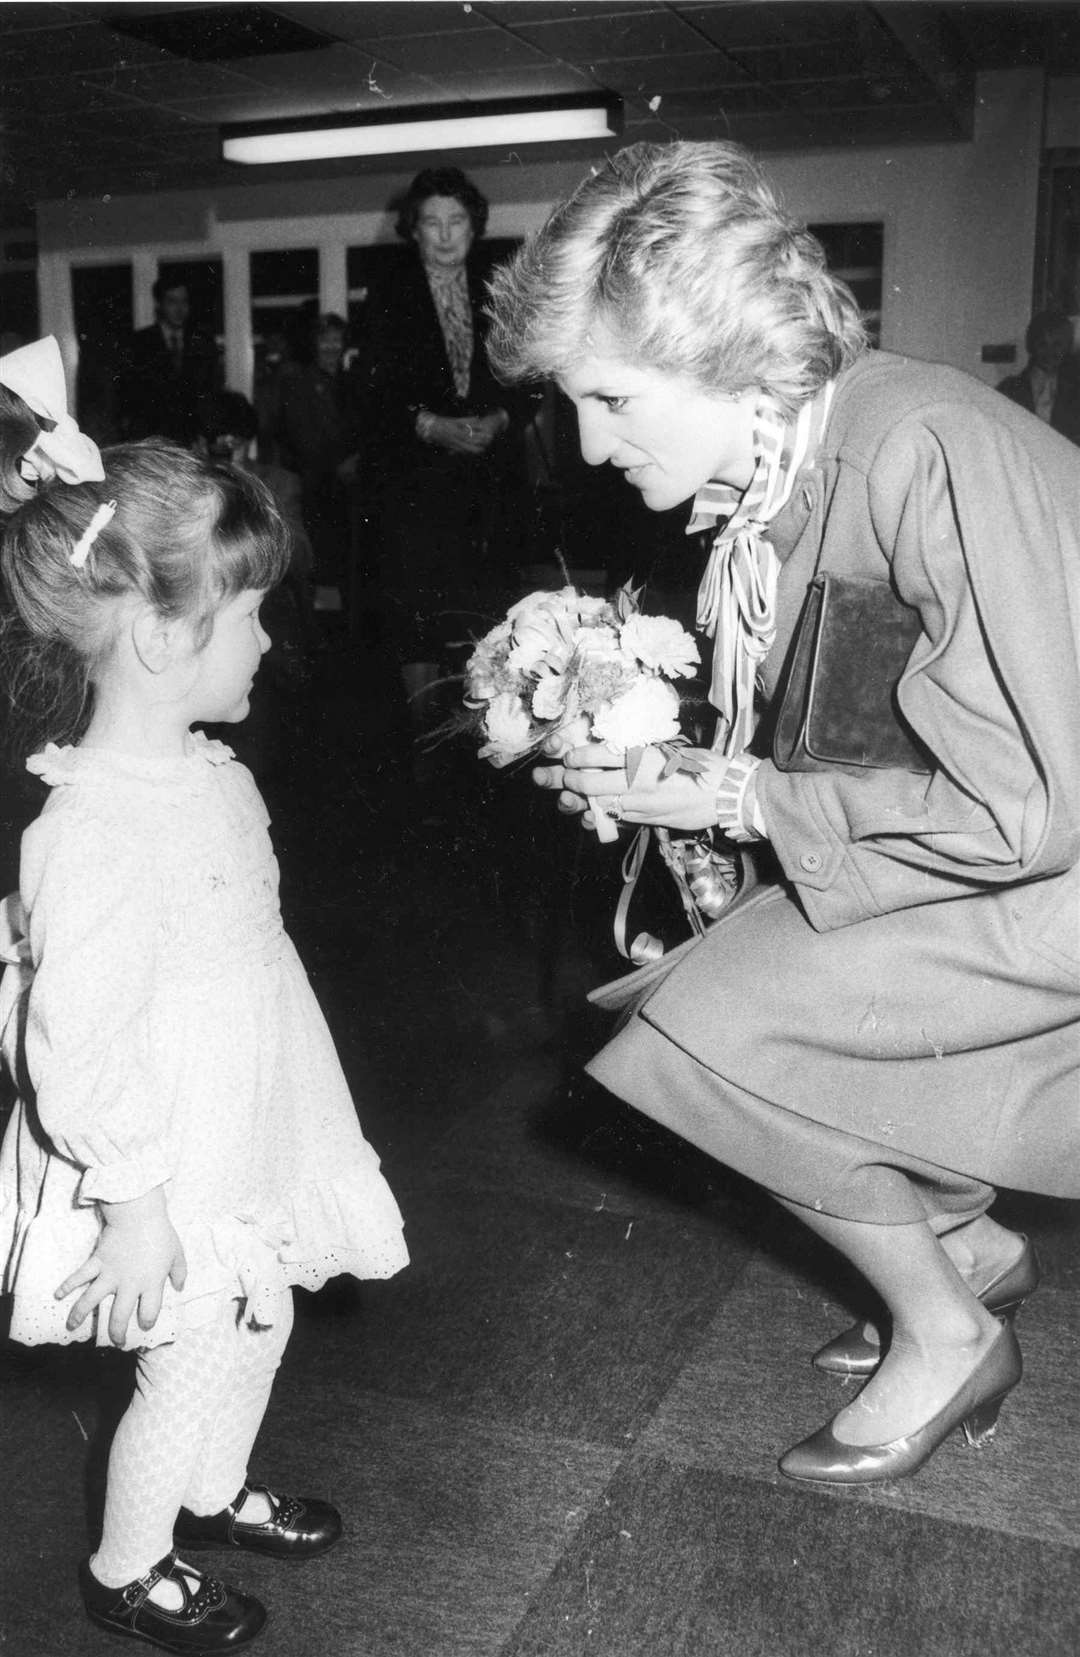 Rachel Malic came face to face with the Princess of Wales at the William Harvey Hospital, Ashford, in December 1985. The Princess, as patron of the national Rubella Council, met women who had been vaccinated against German measles. She returned to the hospital in October 1992 to open the Paula Carr Diabetes Care Centre